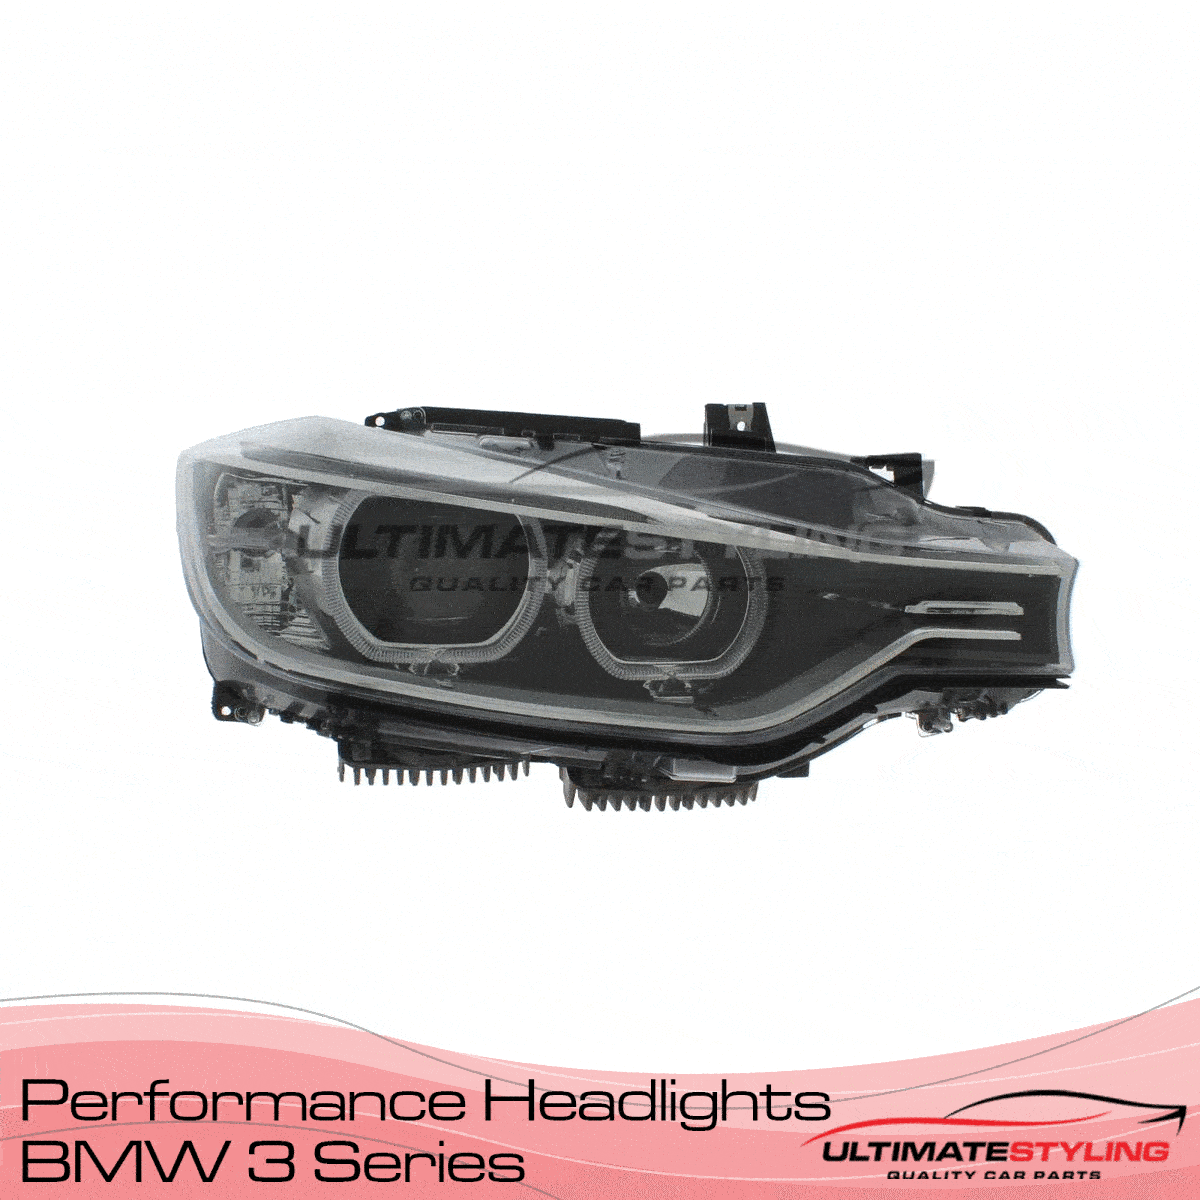 360 view of a BMW 3 series LED headlight upgrade